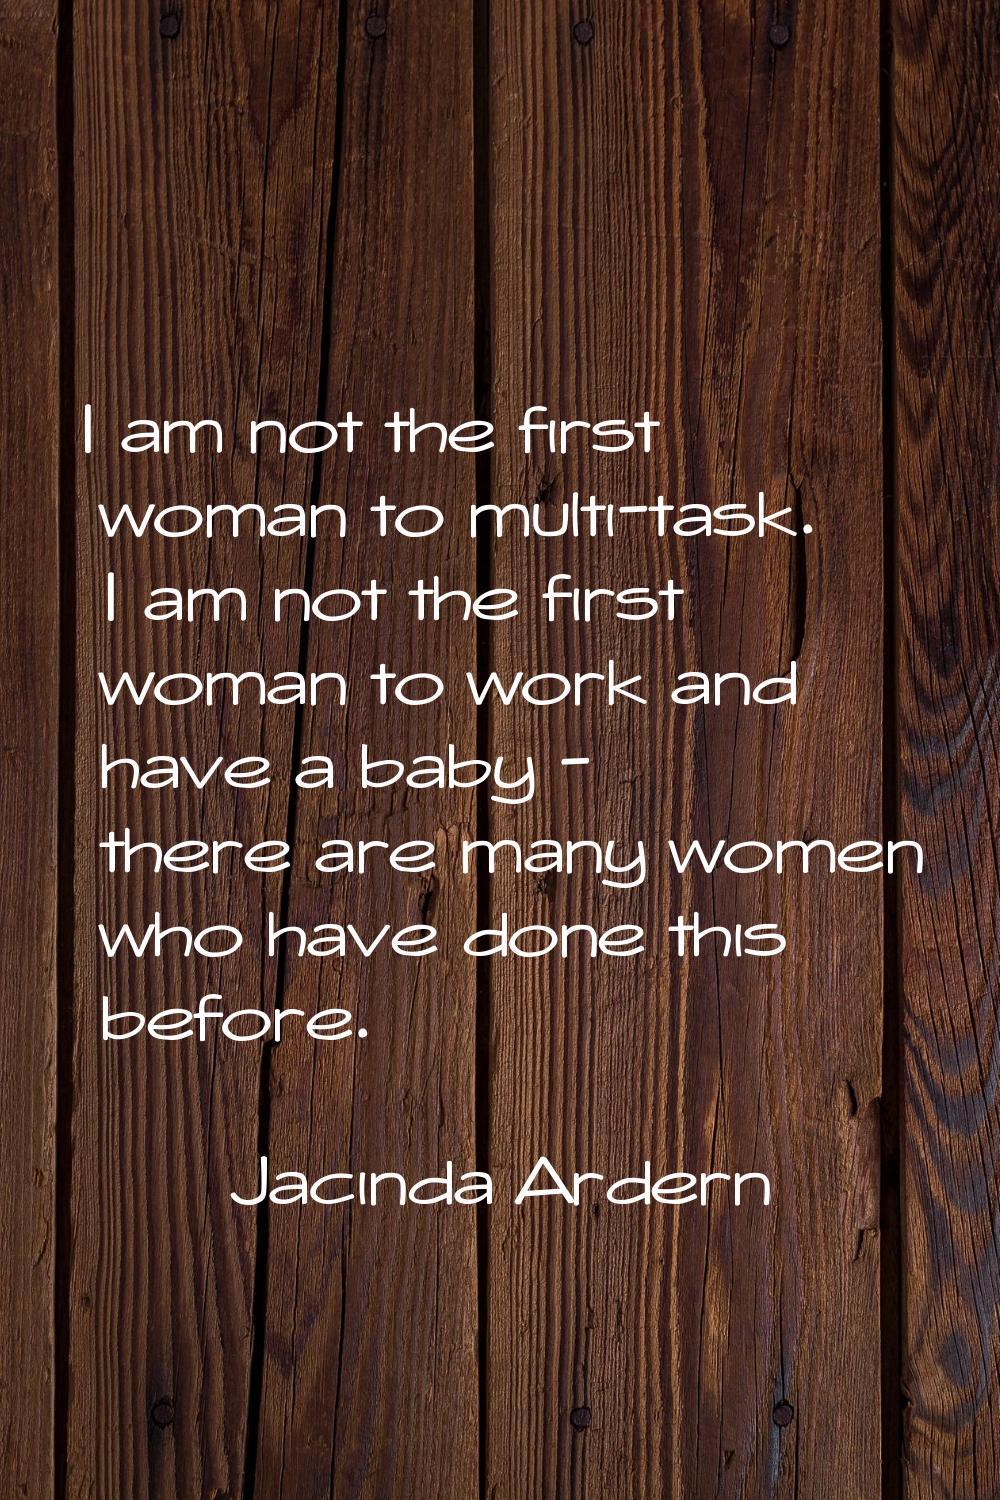 I am not the first woman to multi-task. I am not the first woman to work and have a baby - there ar